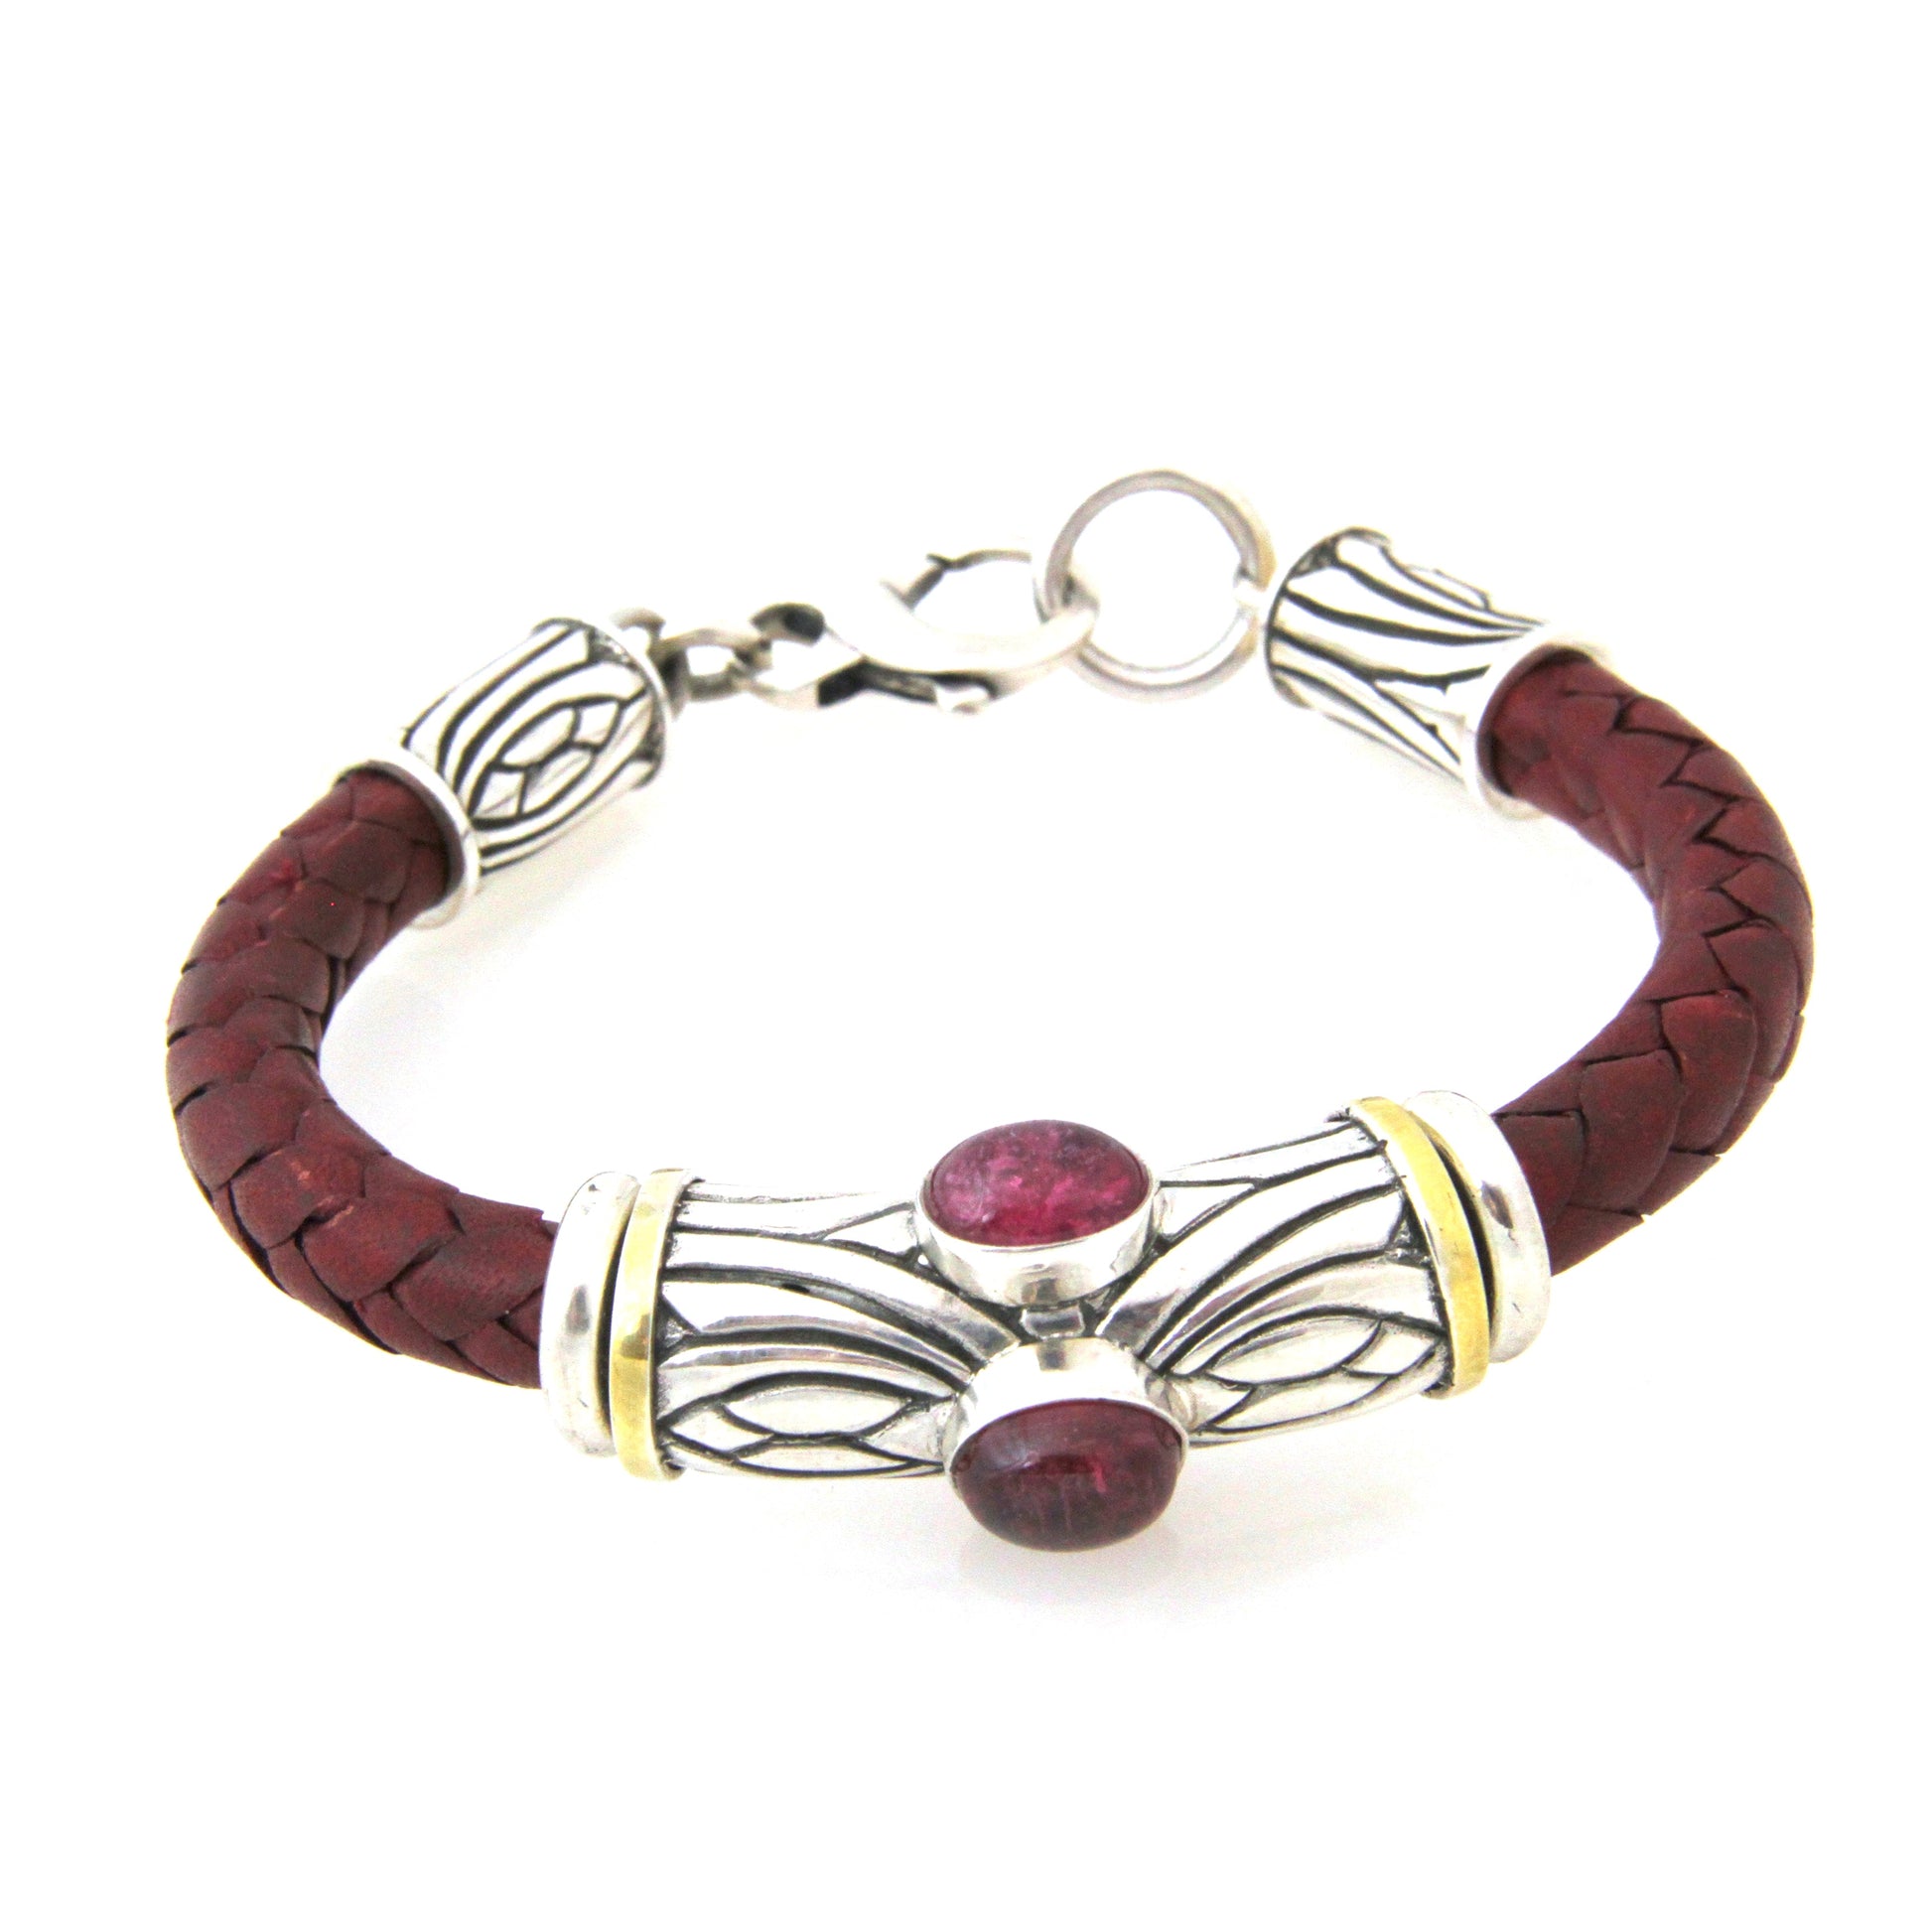 Purple Tourmaline, Vermeil and Sterling Silver with Braided Leather Bracelet-Jewelry-Shreve Saville-Sorrel Sky Gallery